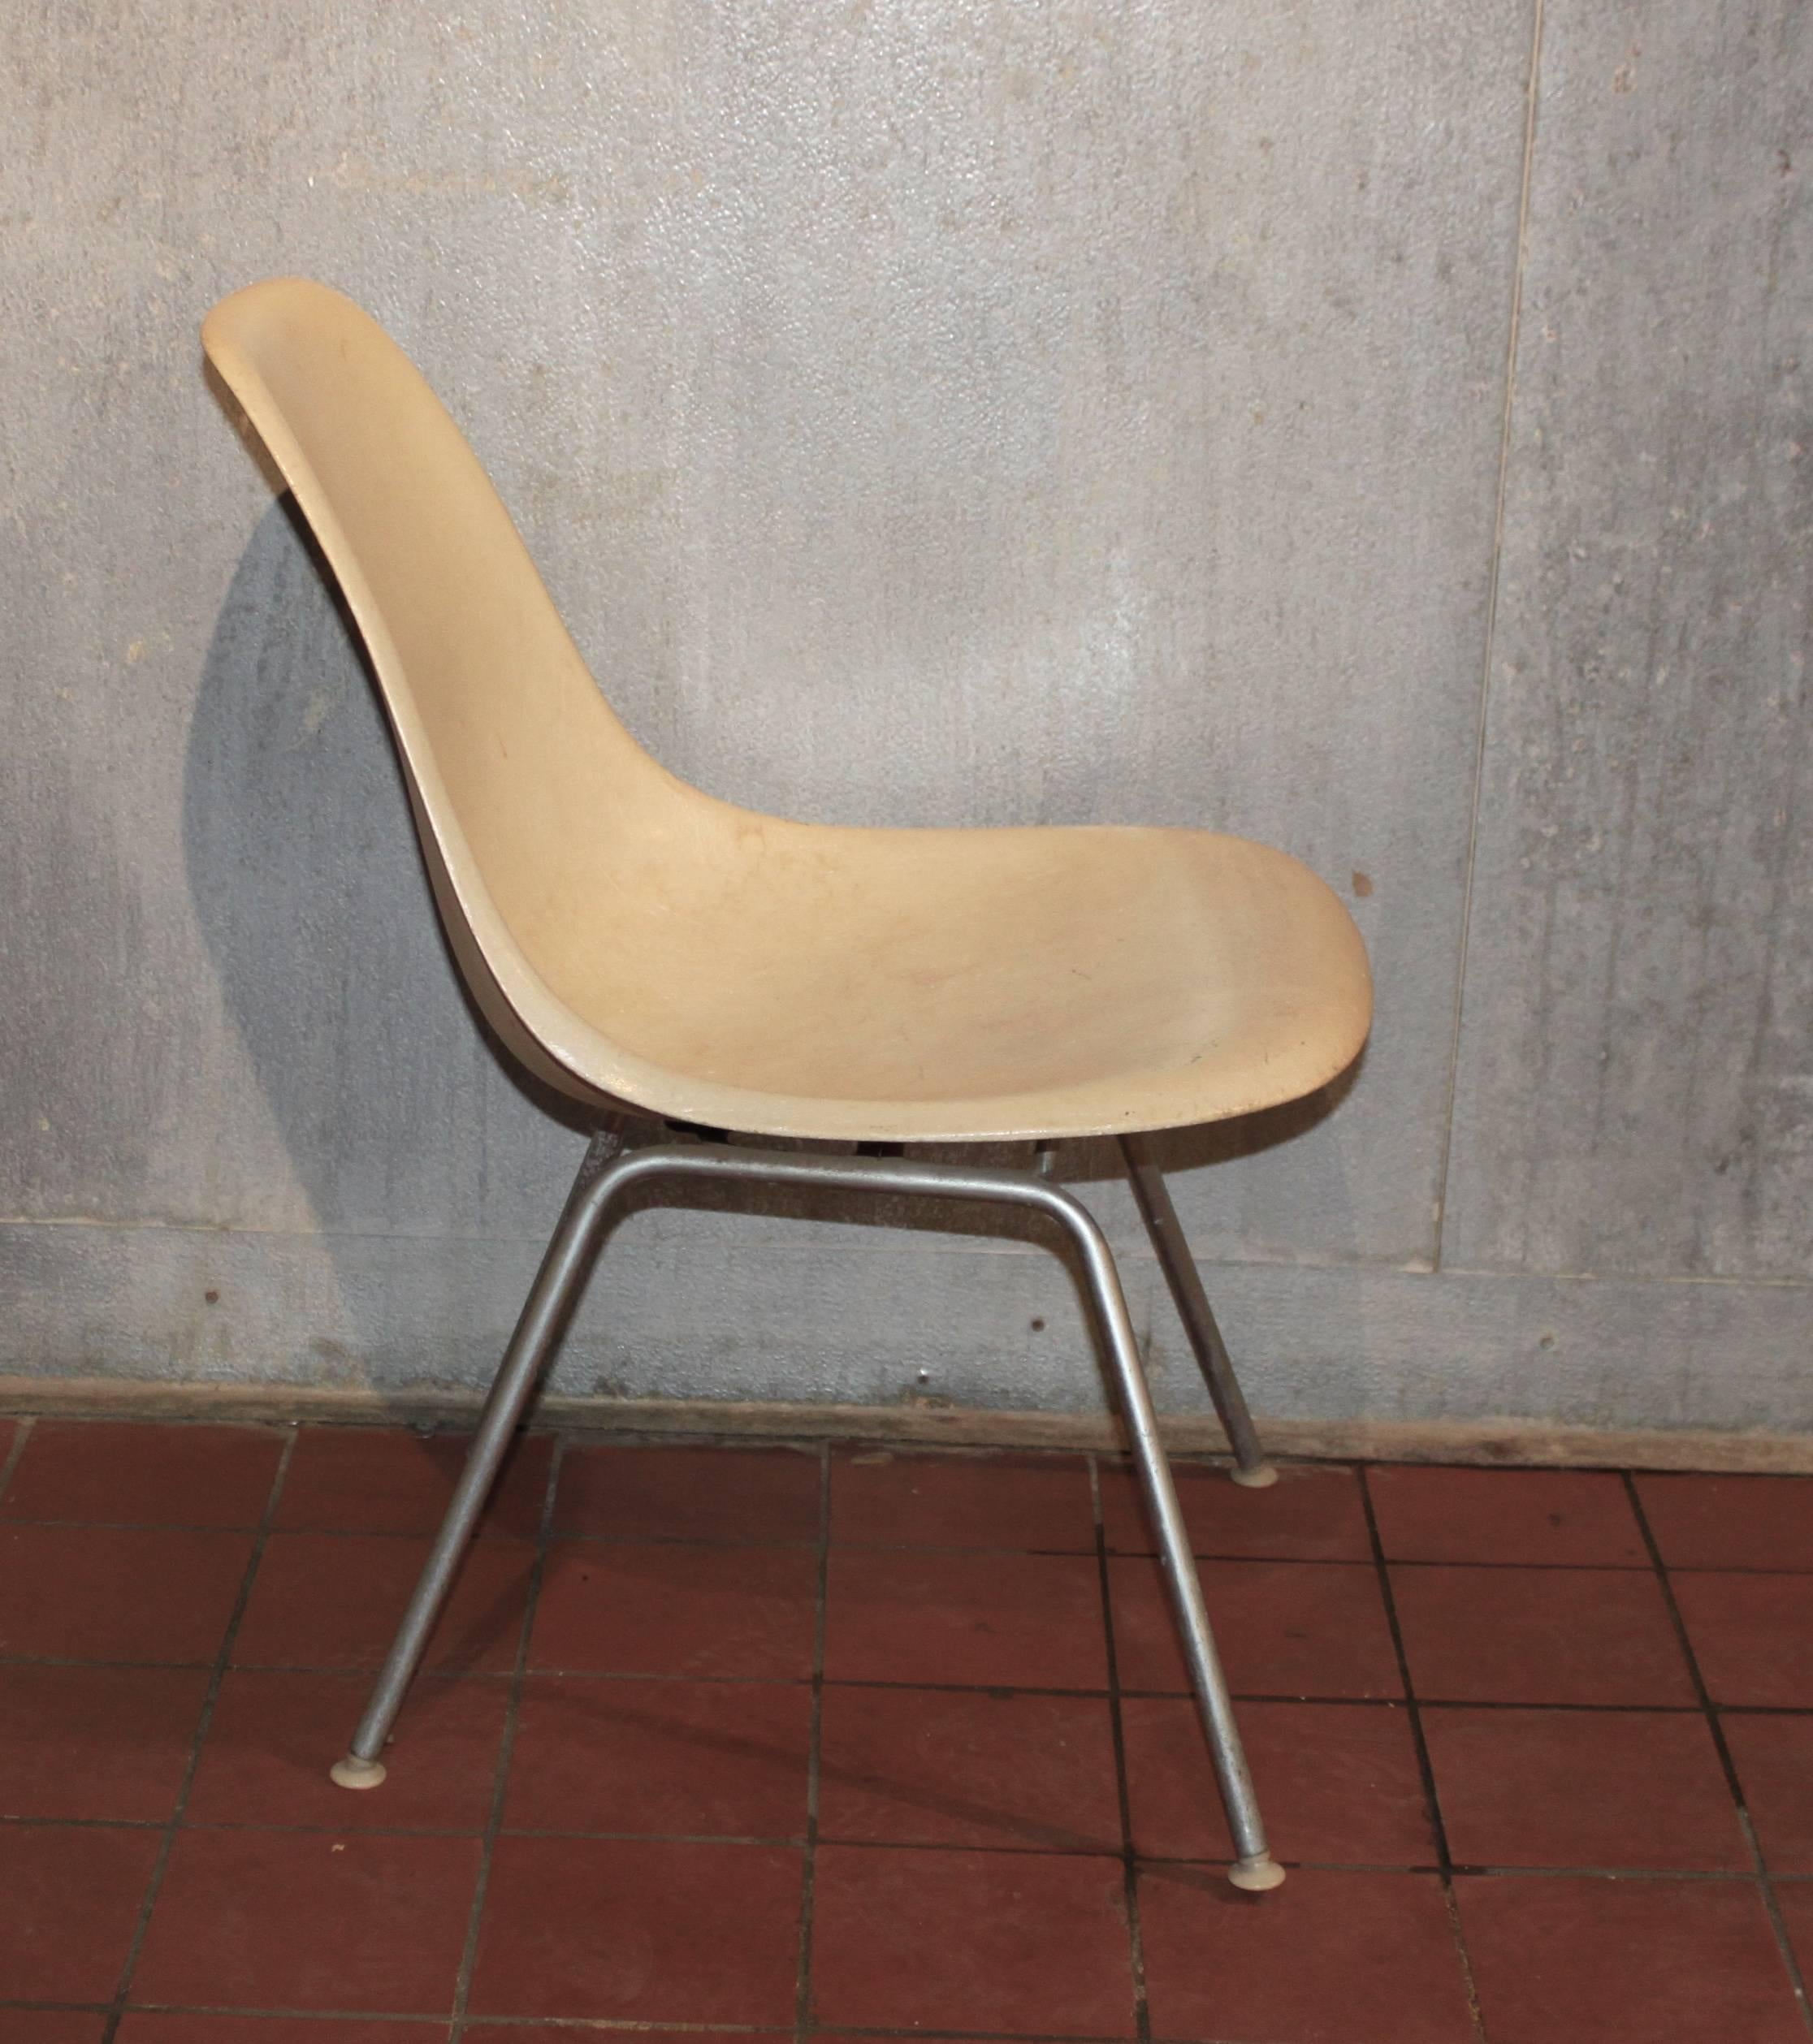 Original Herman Miller Eames shell chair. Low seat height version.